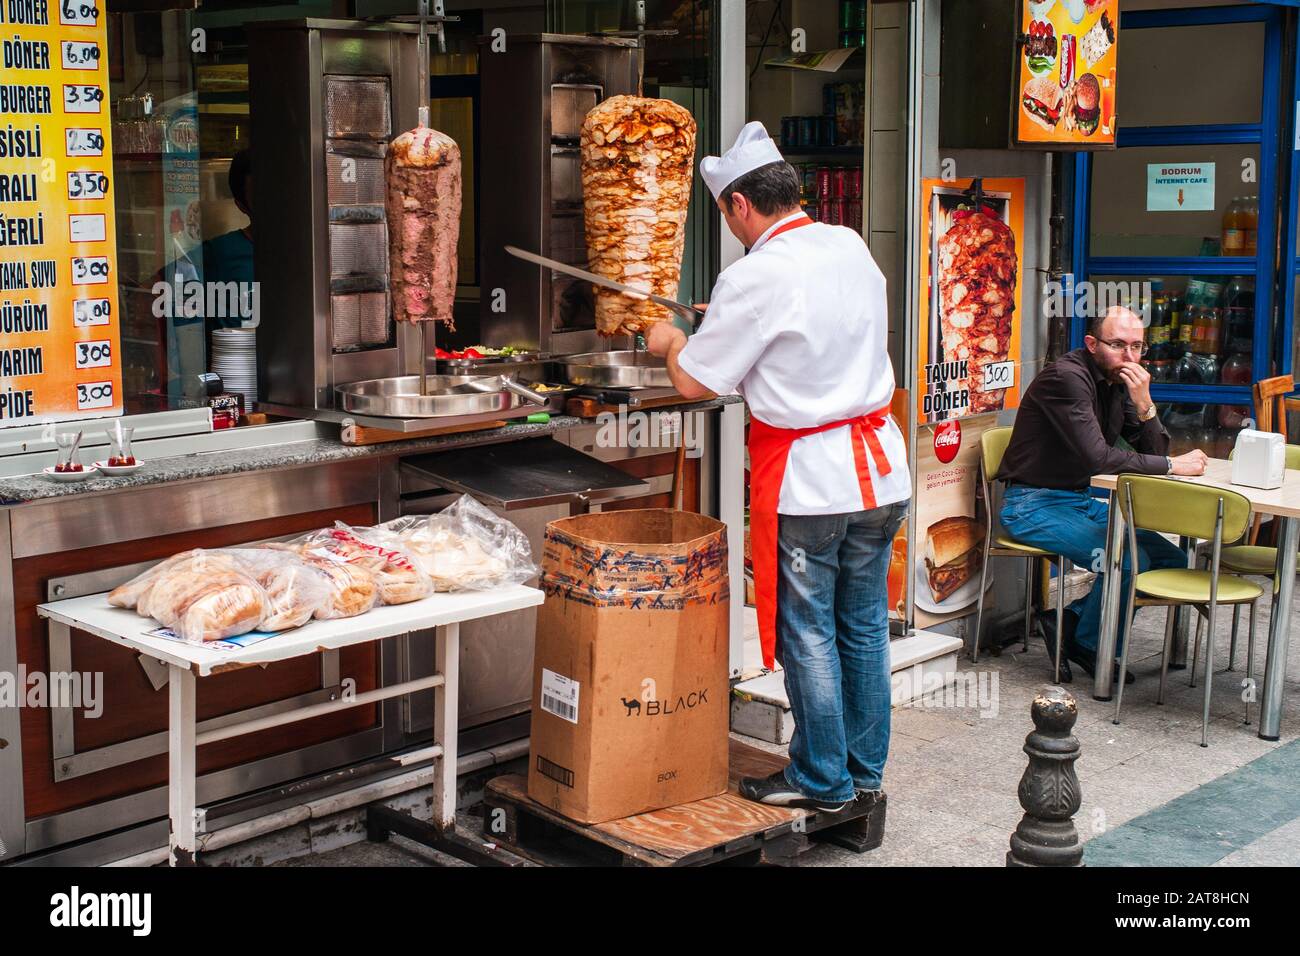 Istanbul, Turkey - June 8 2014: Cook Cutting Meat From a Doner Kebab for a Customer in a Turkish Street Food Restaurant. Stock Photo